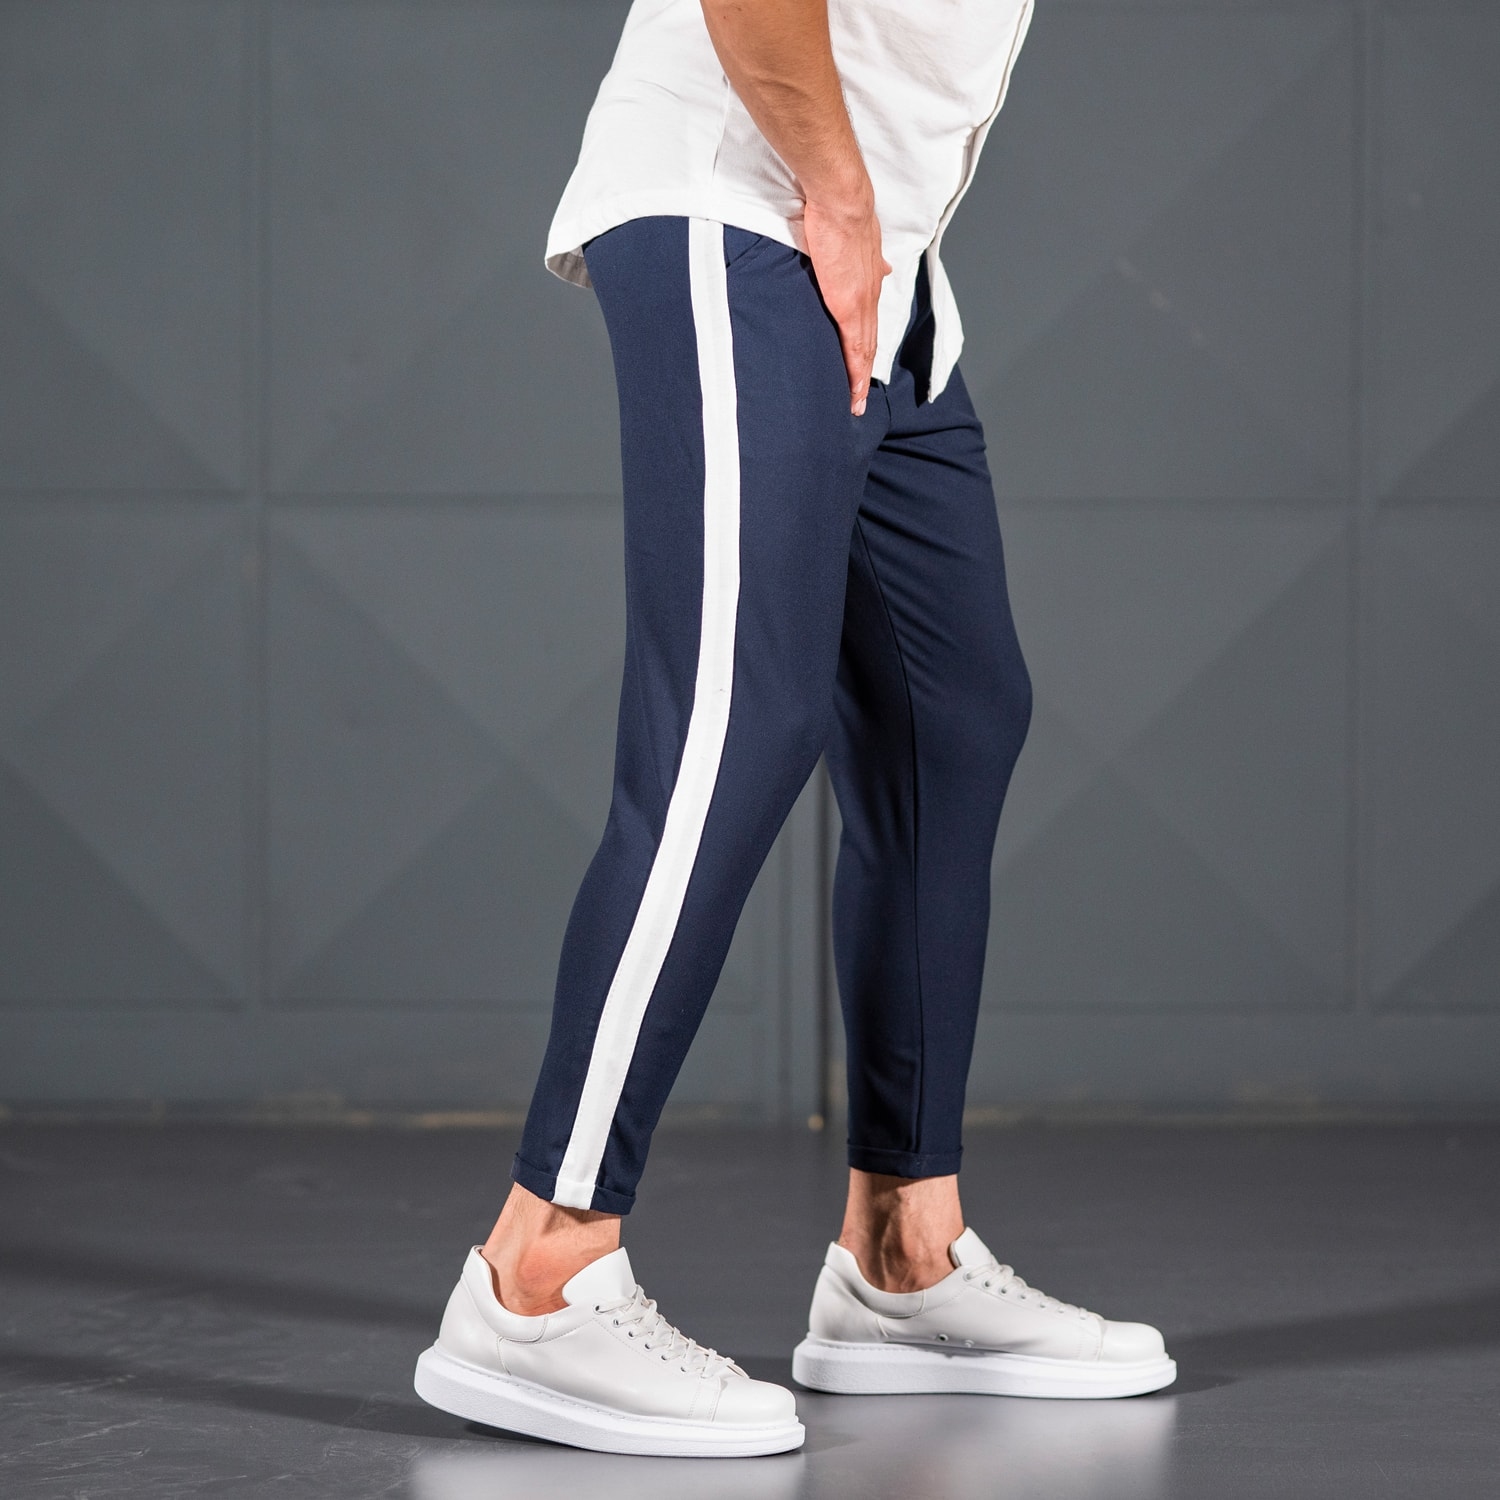 navy blue pants white shoes